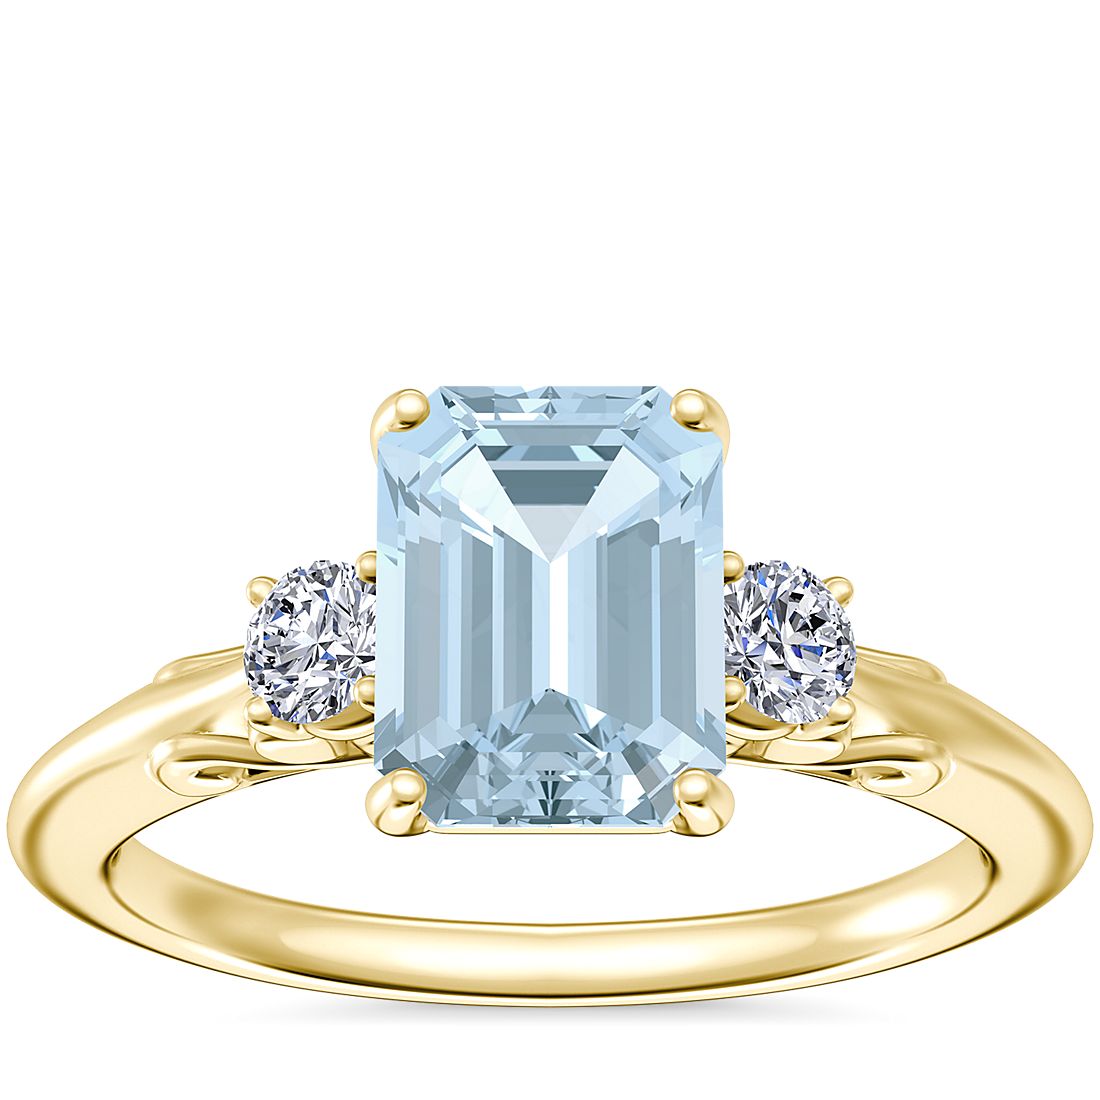 Vintage Three Stone Engagement Ring with Emerald-Cut Aquamarine in 14k Yellow Gold (8x6mm)